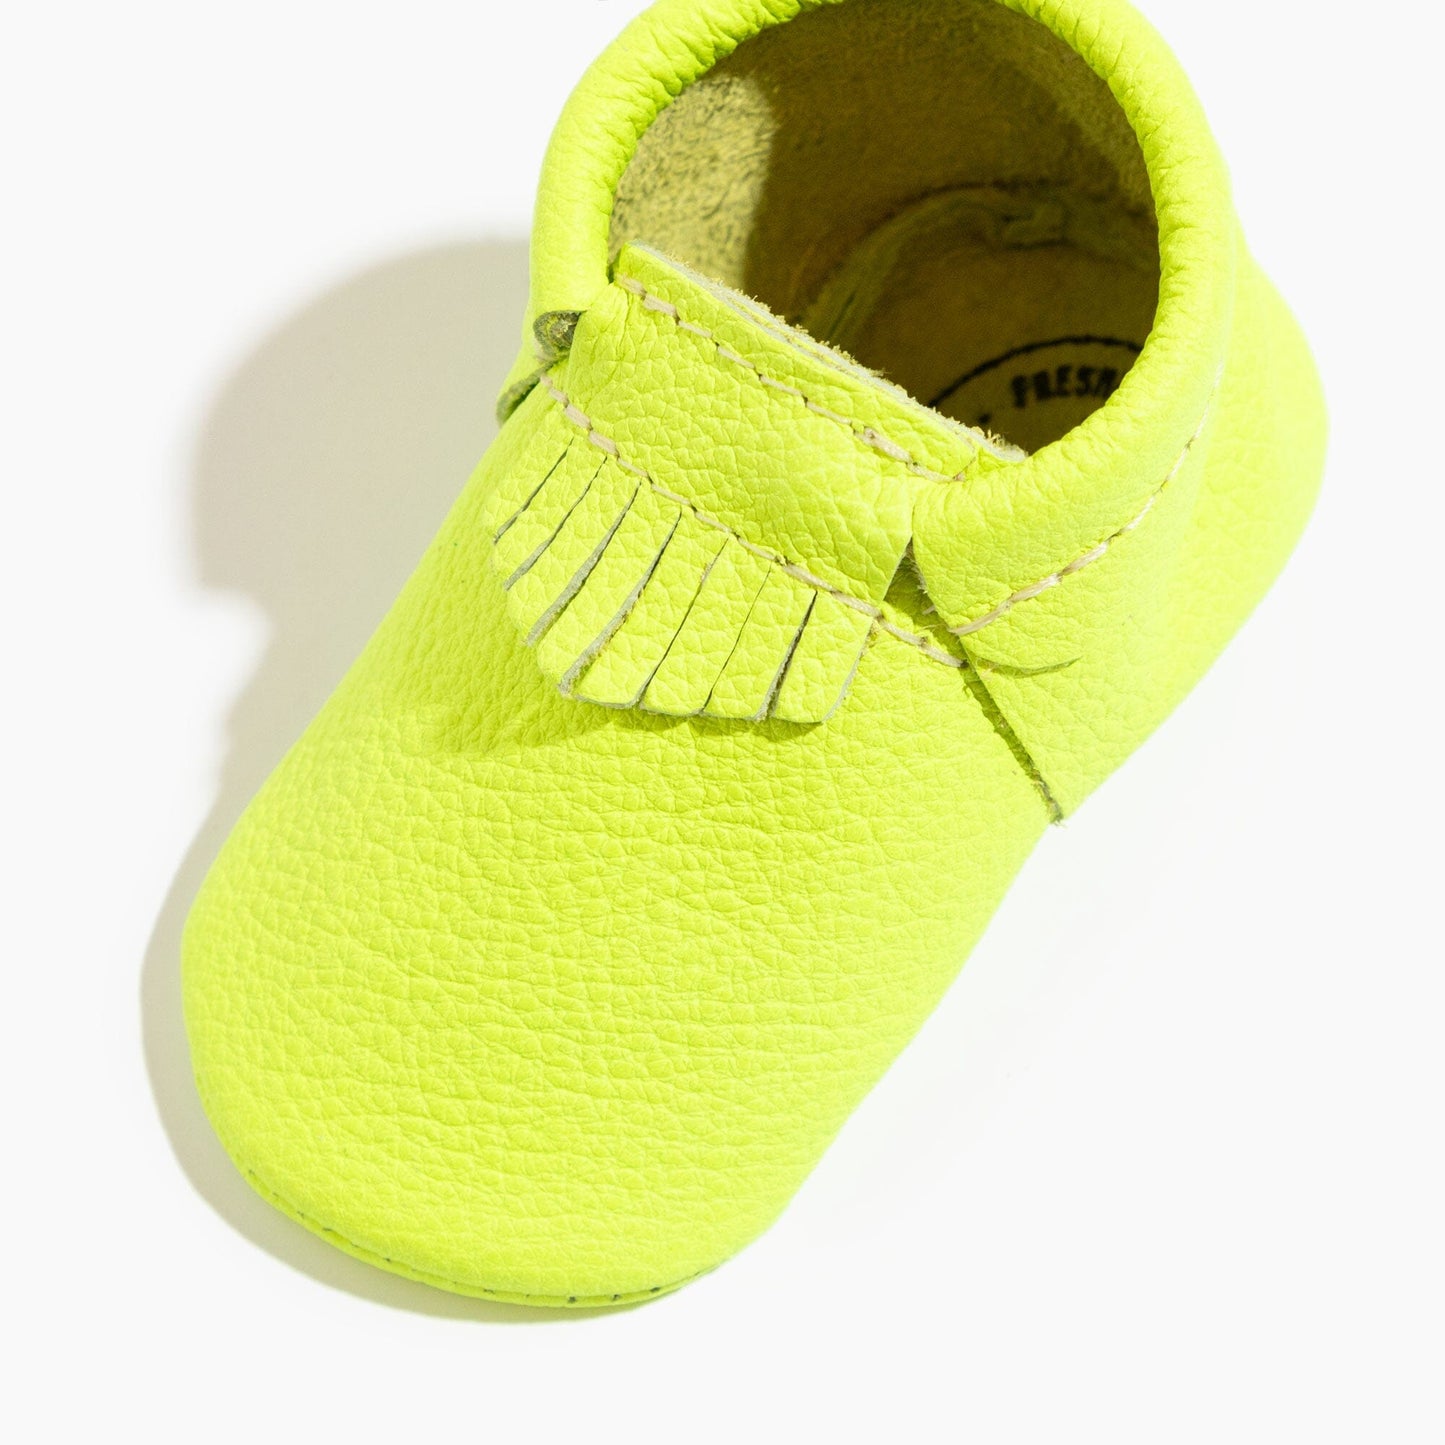 Extra Yellow City Baby Shoe City Mocc Soft Sole 